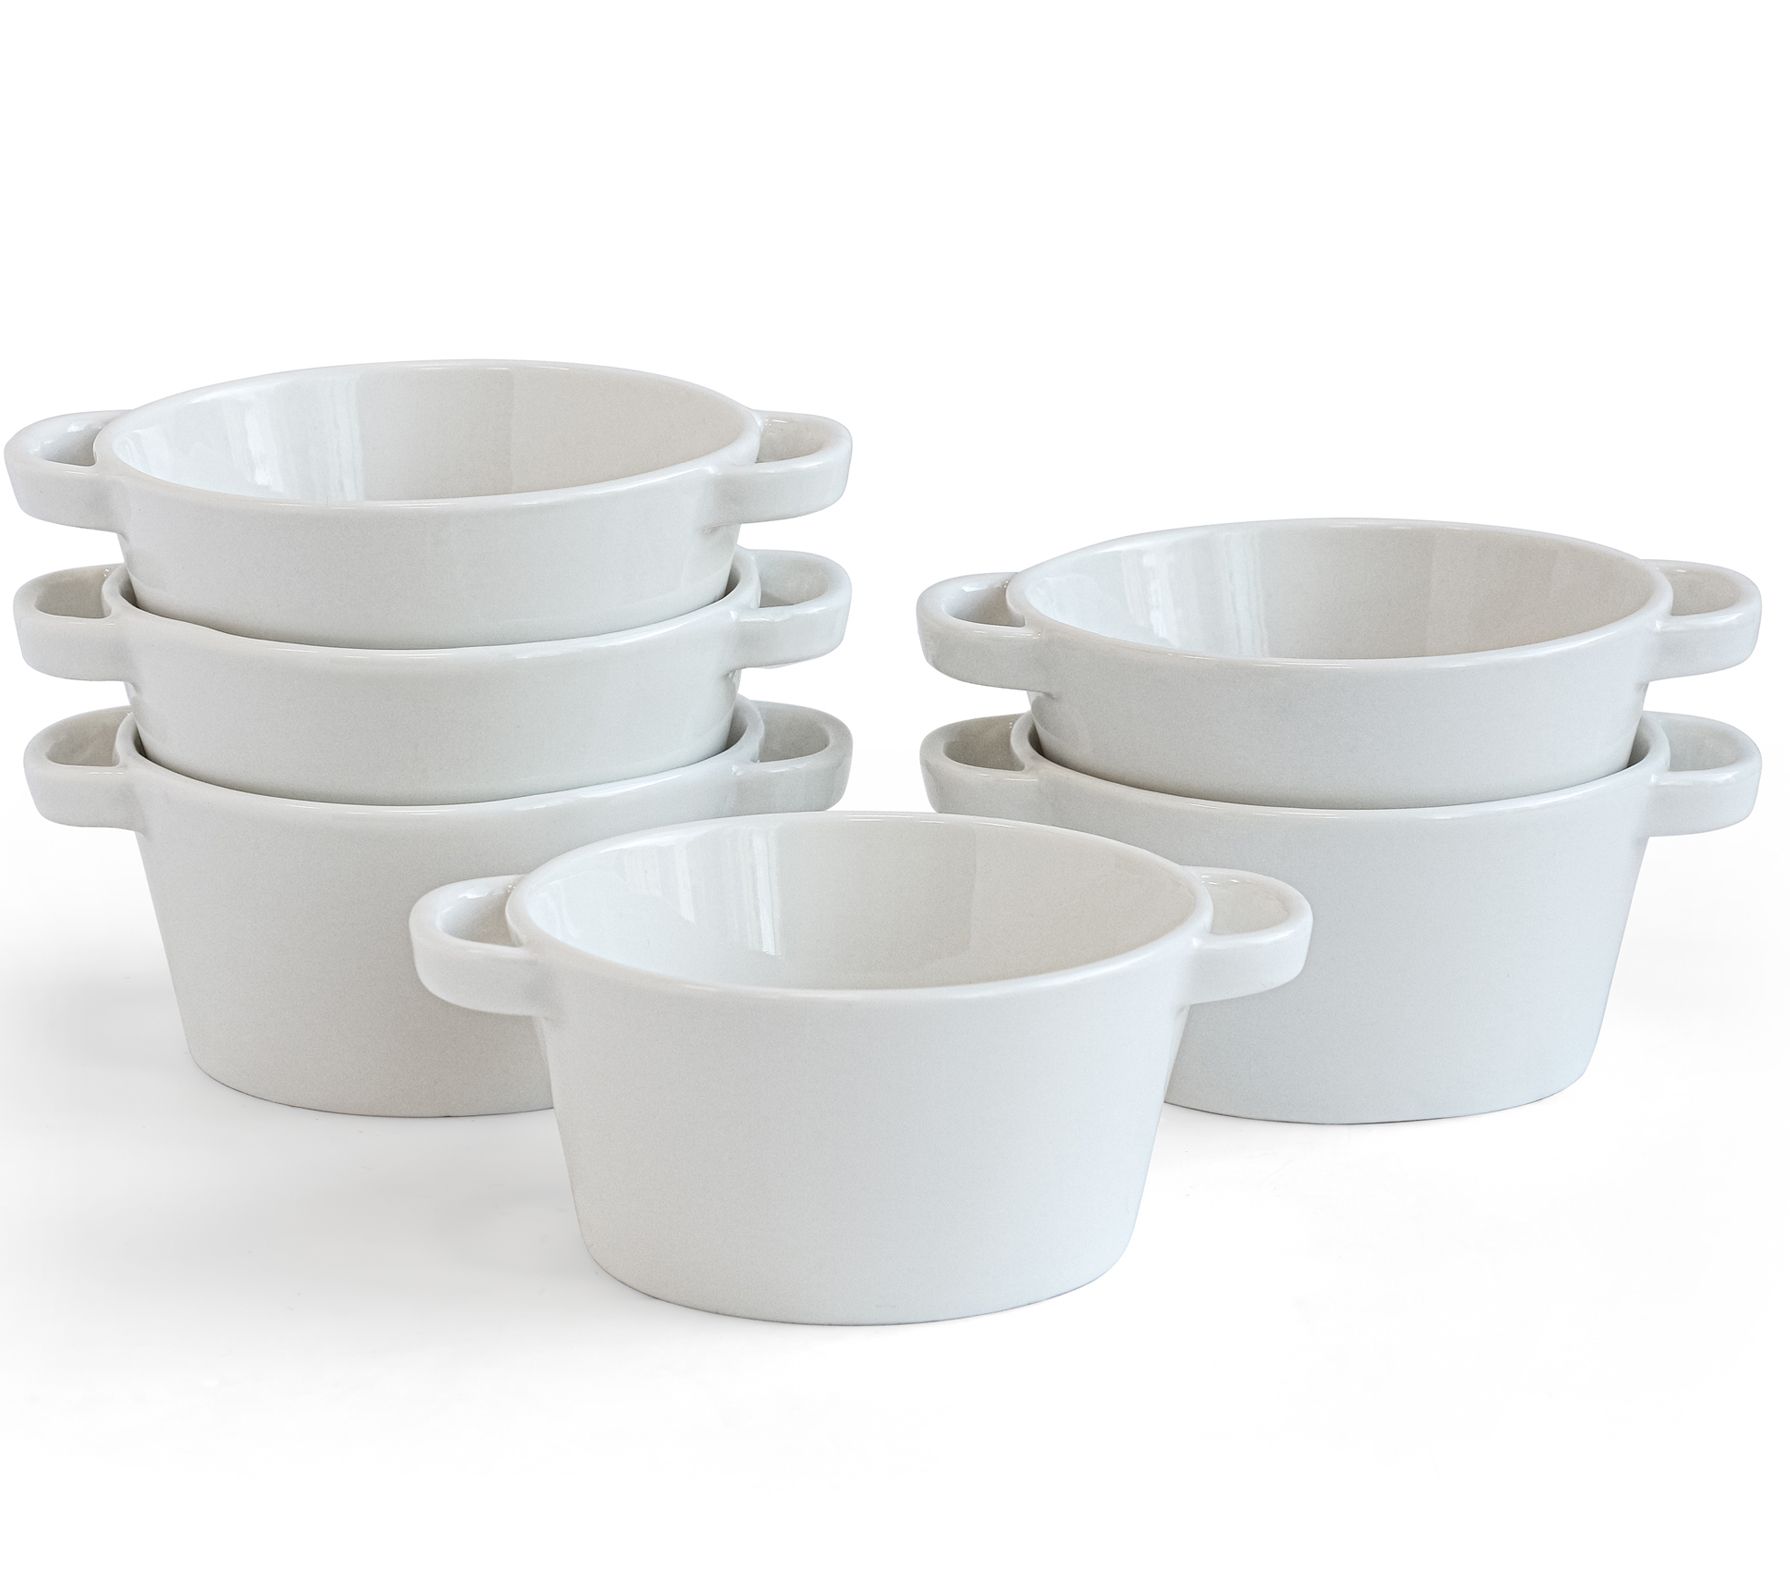 Over & Back Lily Set of 6 Ramekins with Handles - QVC.com